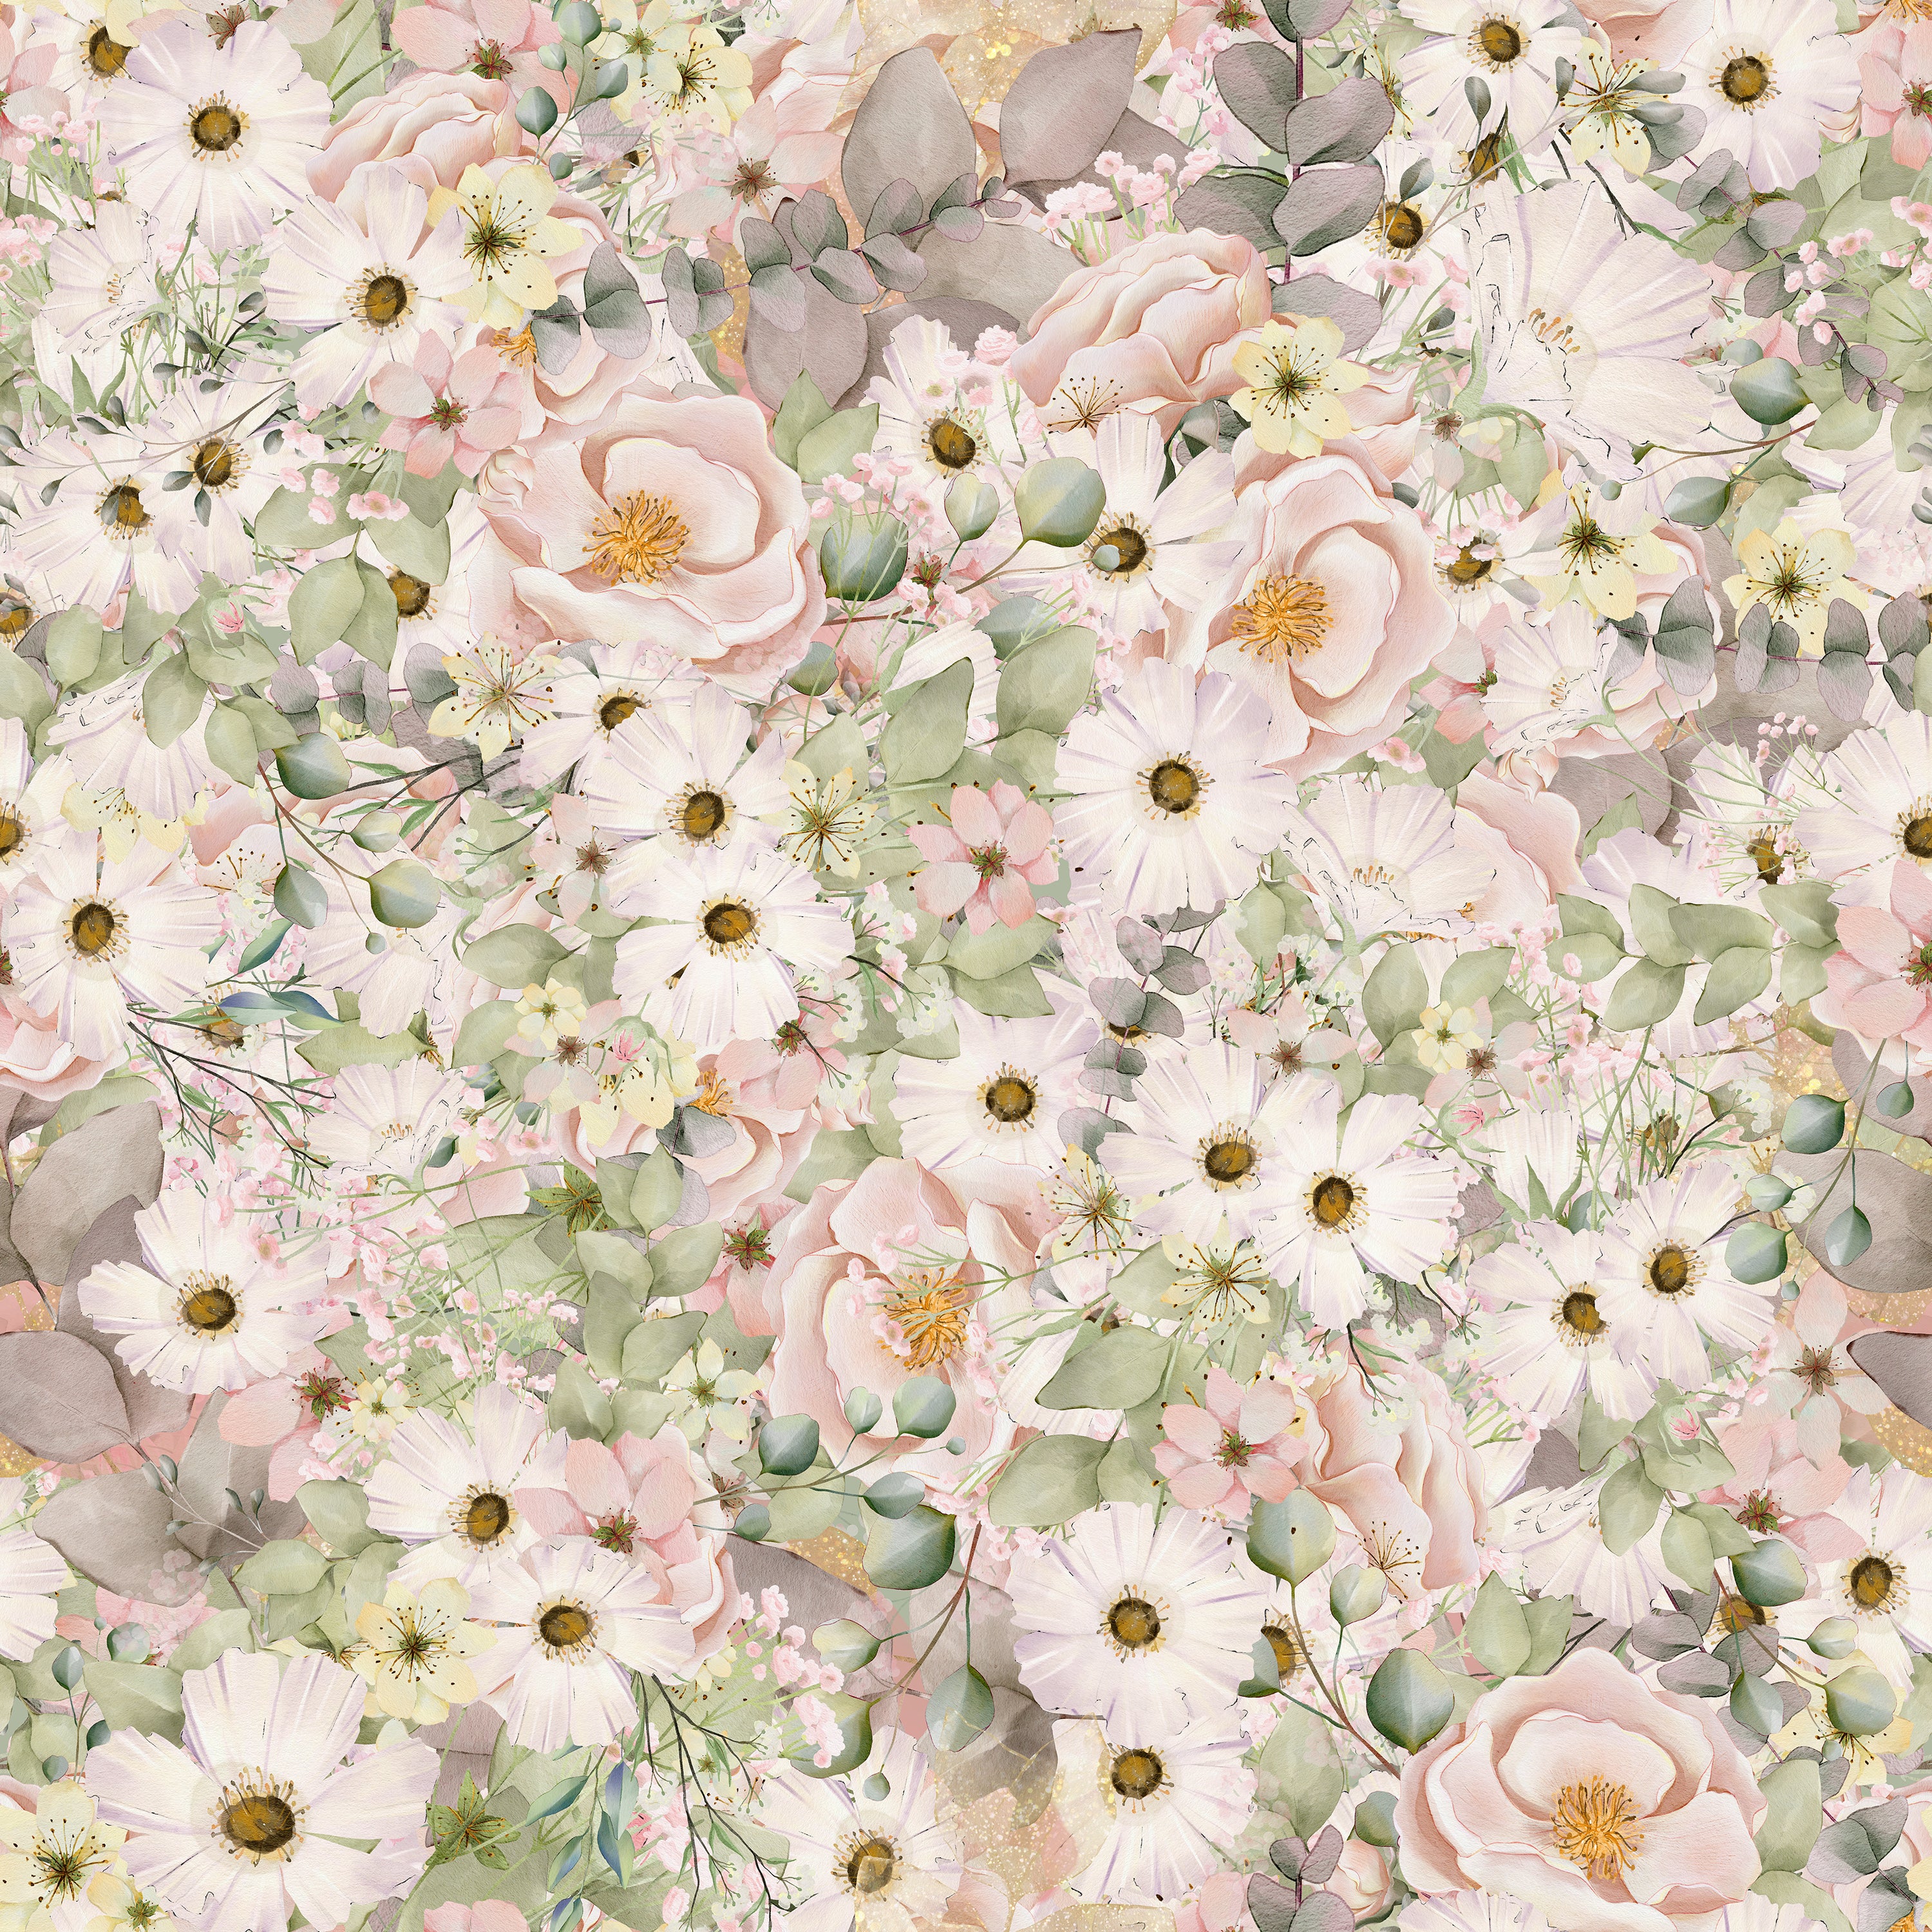 A close-up of the Pink Fleur Wallpaper - 75", displaying an intricate floral pattern with a variety of flowers such as roses and daisies in shades of pink, complemented by green foliage and subtle golden accents, set against a neutral background